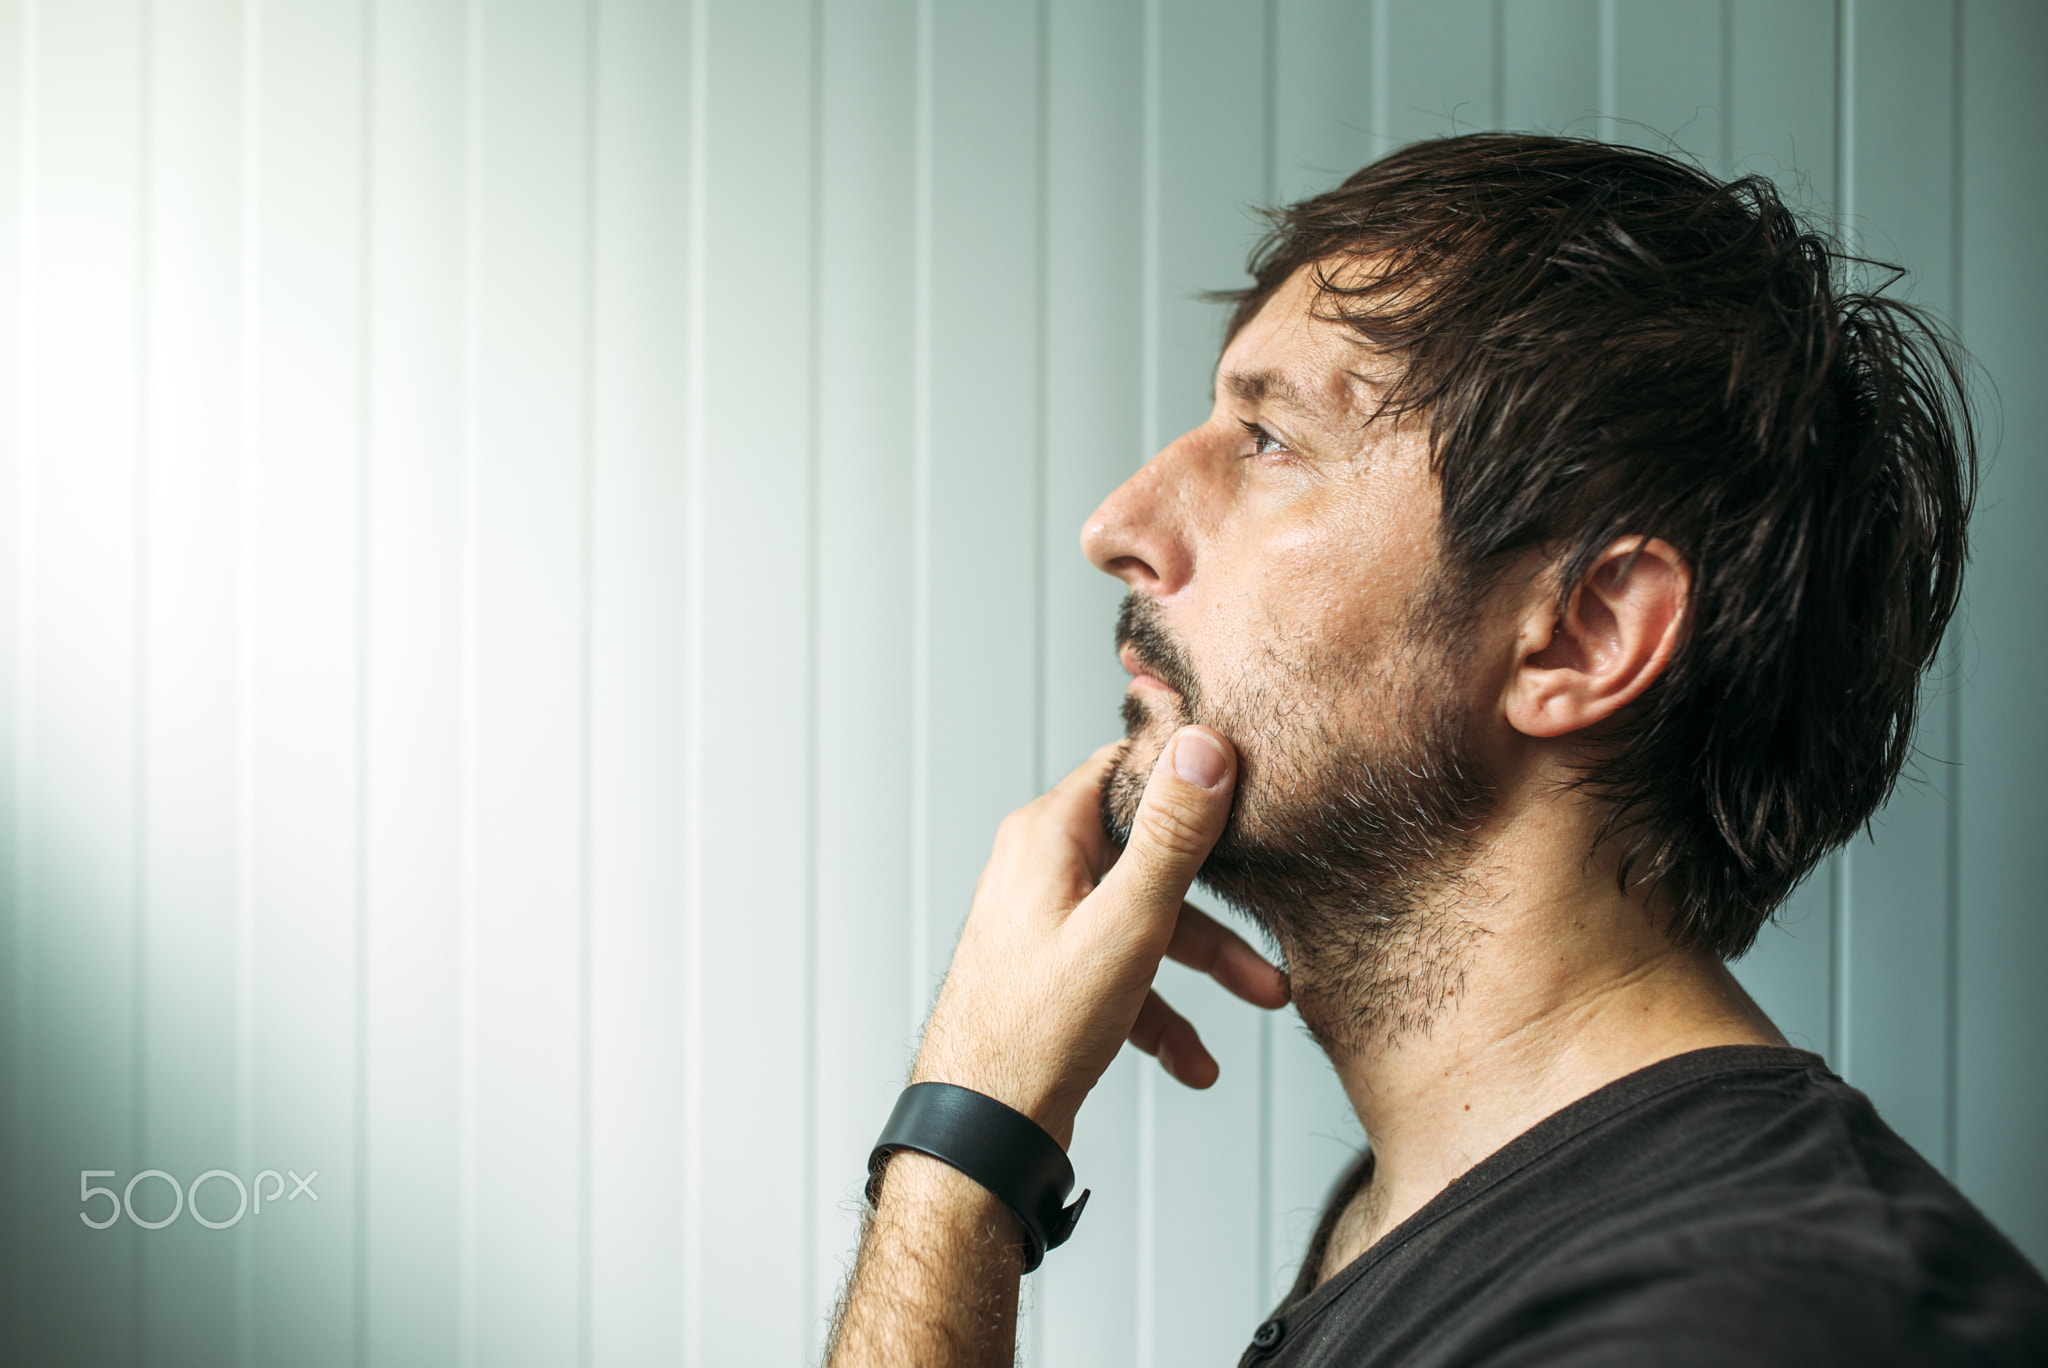 Pensive unshaven man with hand on chin making decision